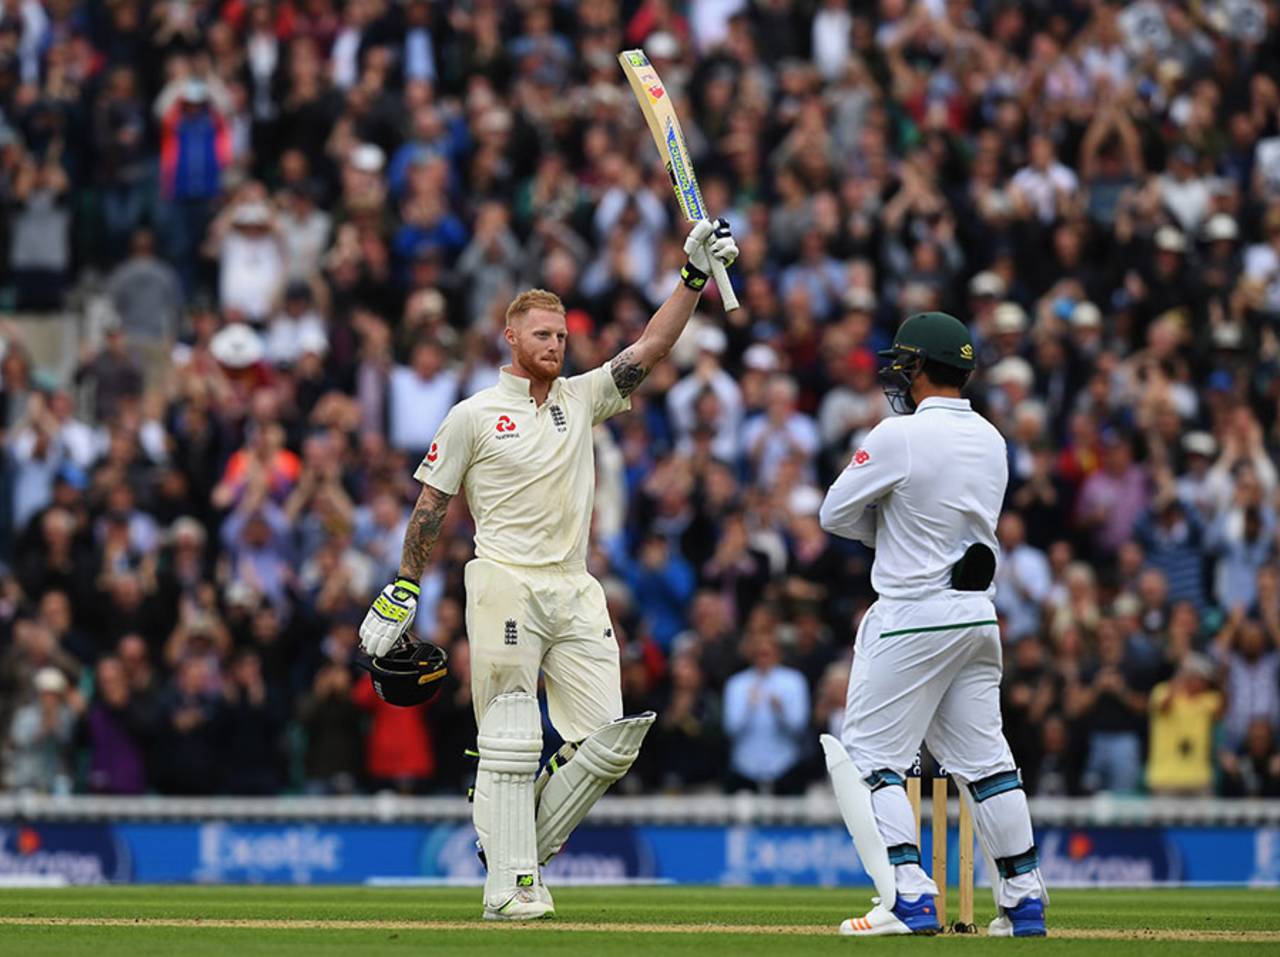 Ben Stokes celebrates his century, England v South Africa, 3rd Investec Test, The Oval, 2nd day, July 28, 2017